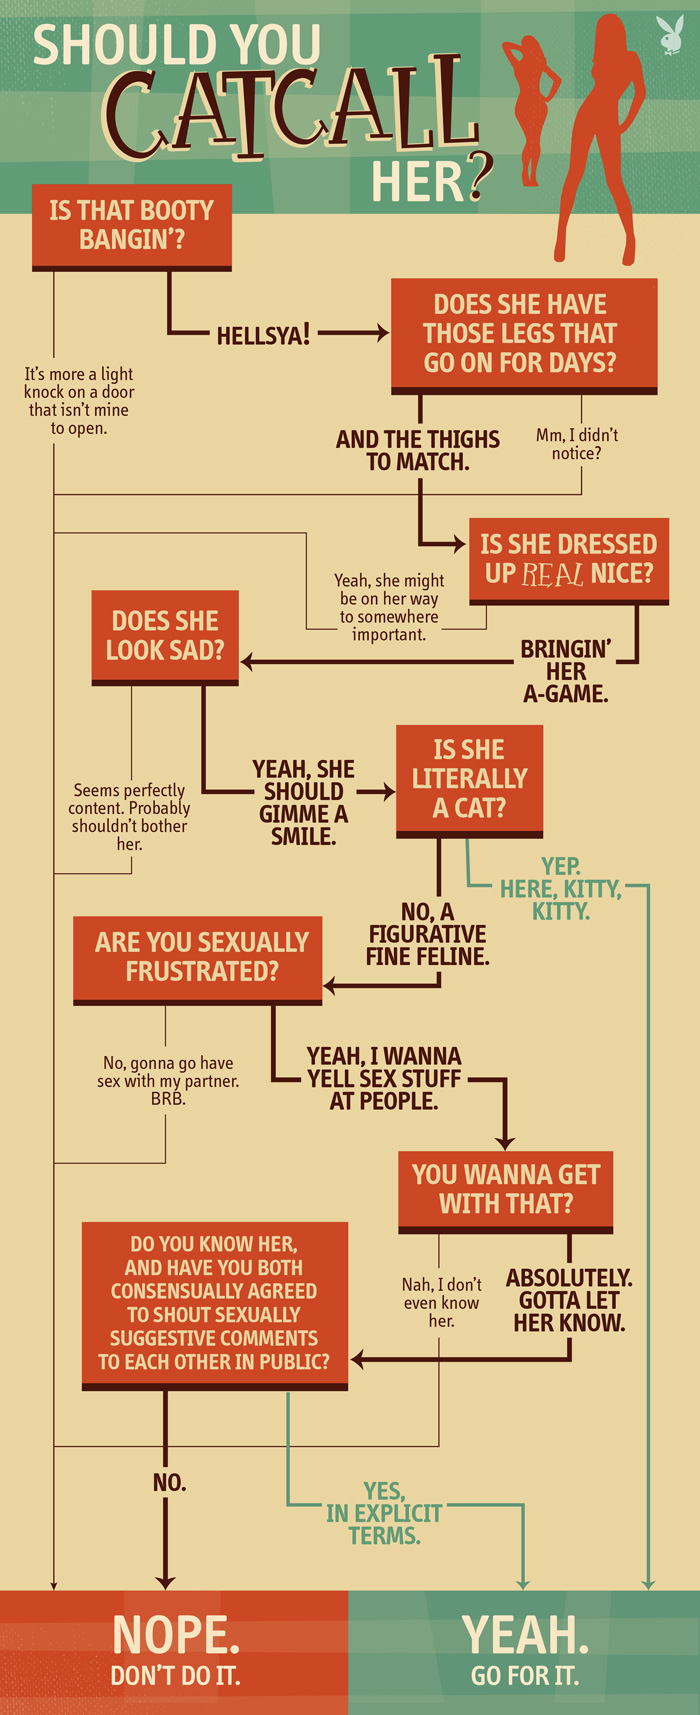 Should You Catcall Her?